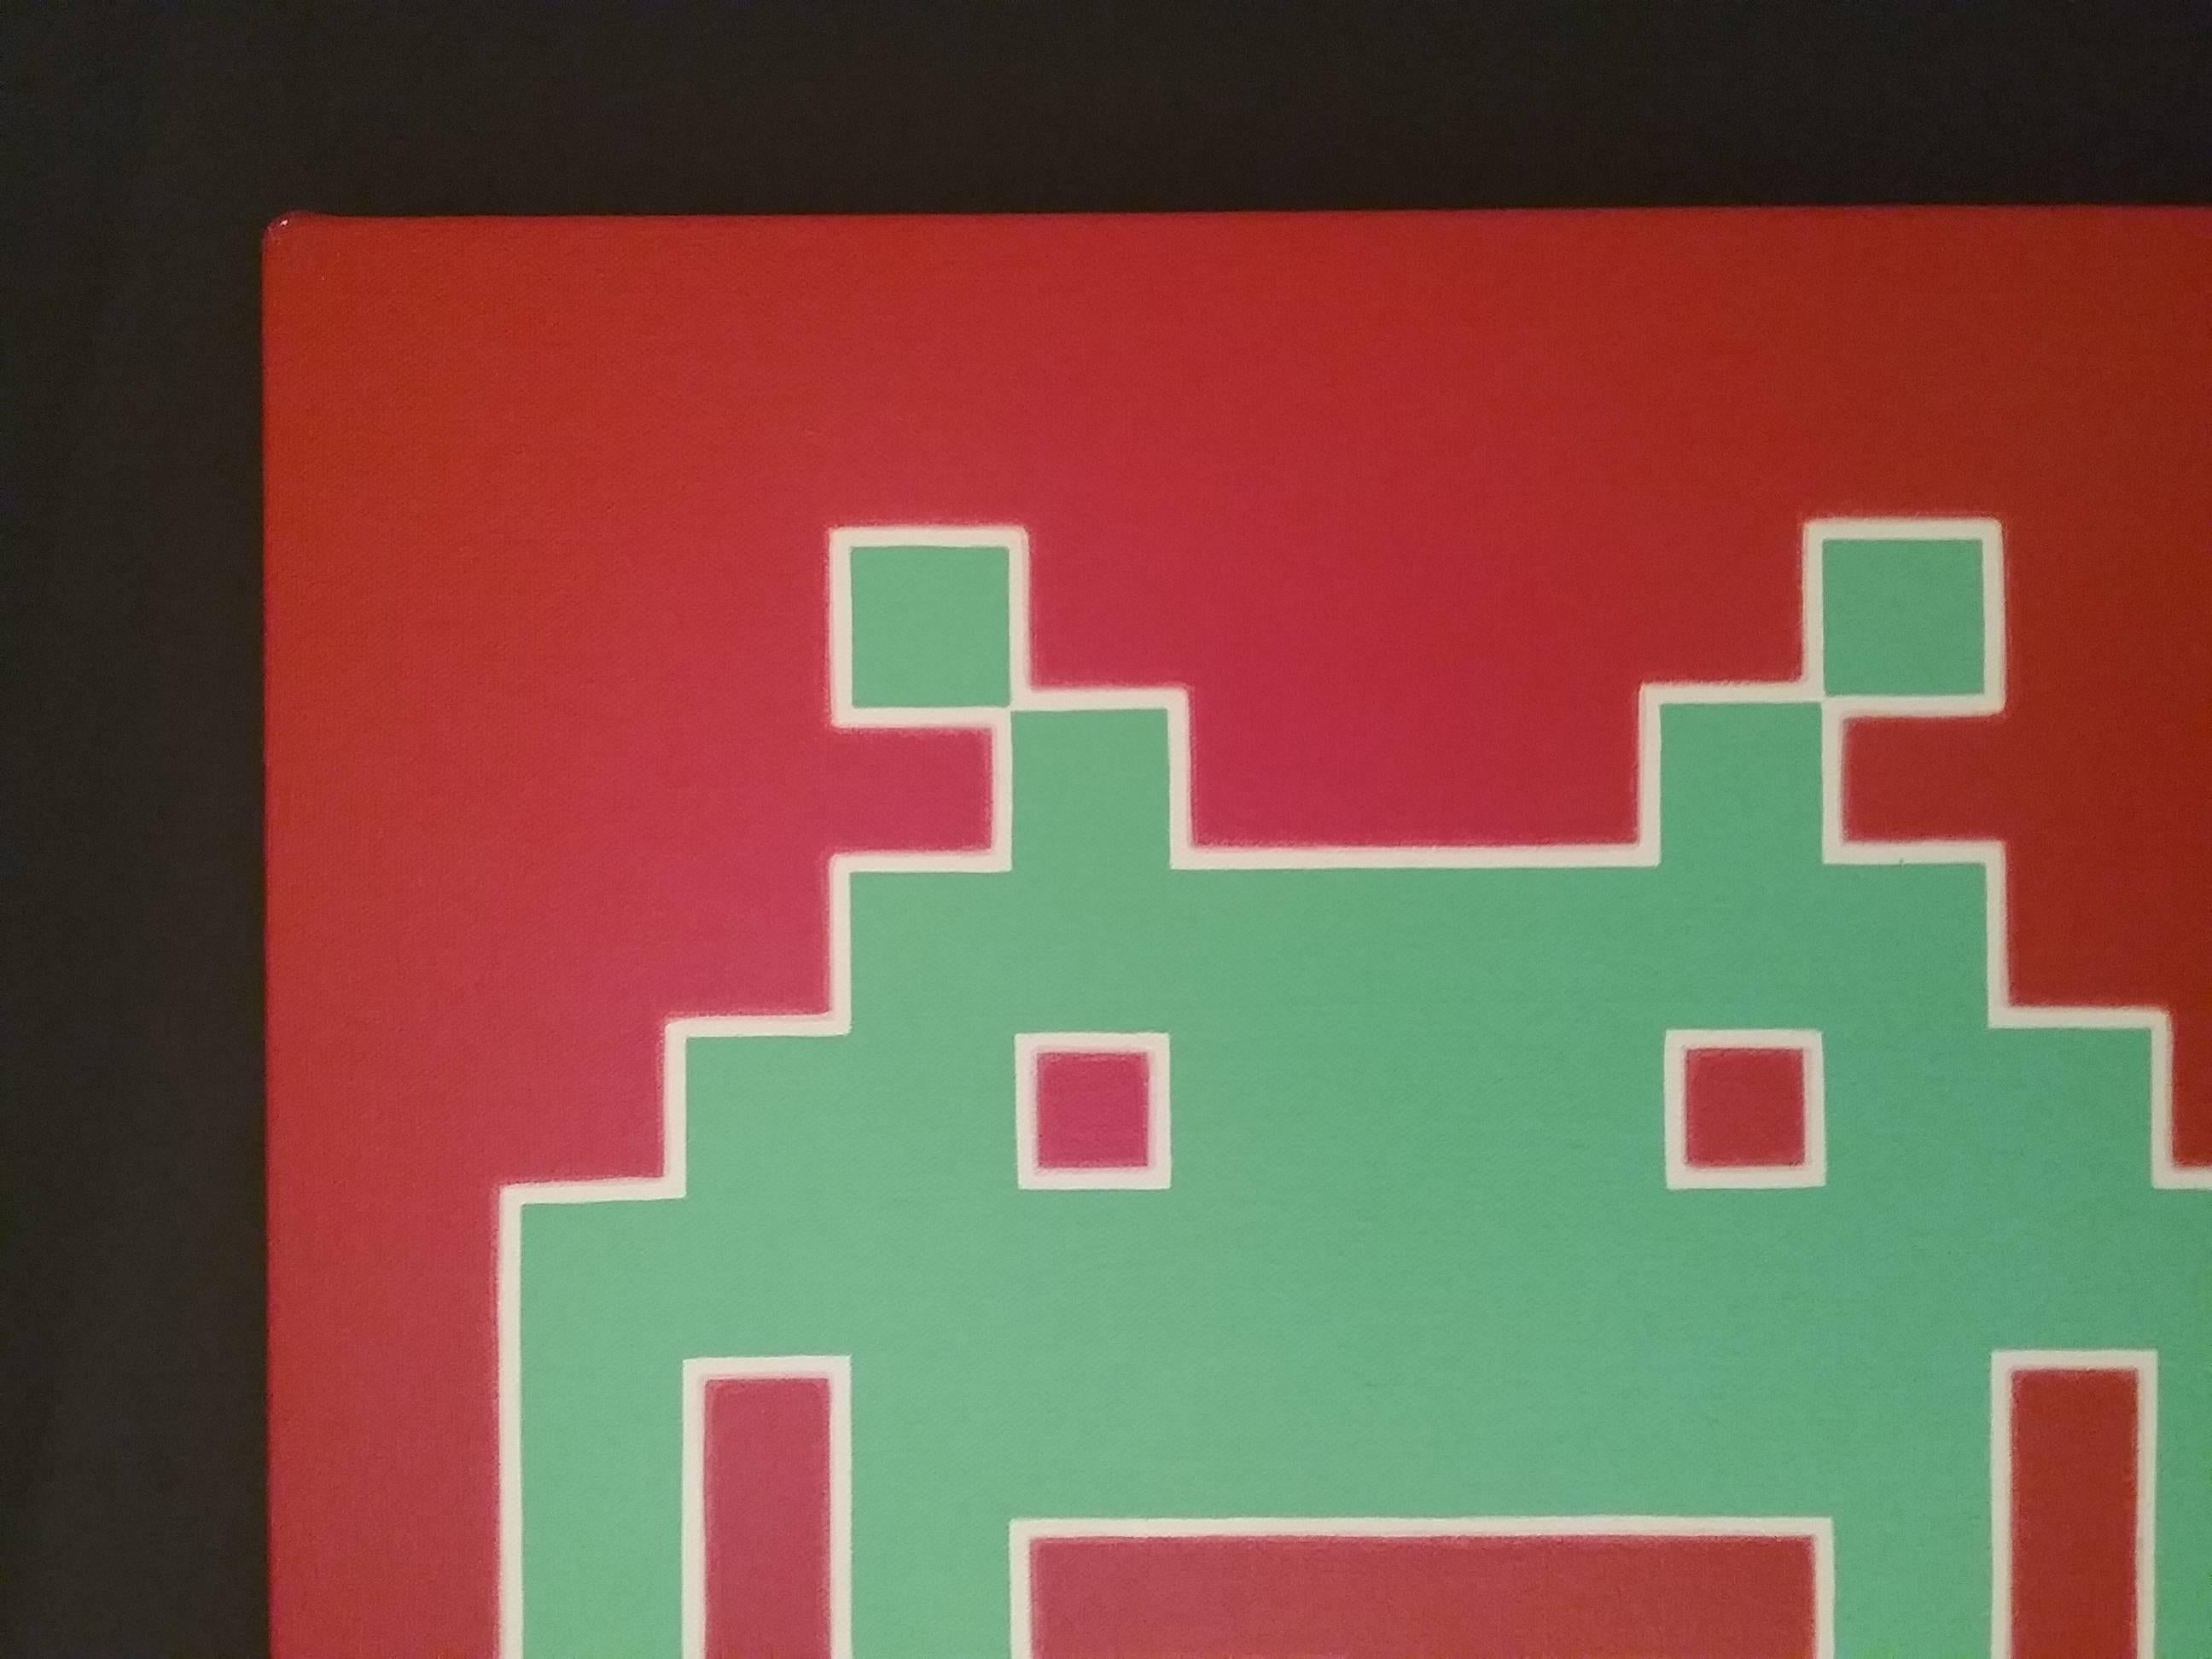 Painting.  Acrylic on canvas, laid on board.  Signed and dated April 2003.  Dimensions: 14inches x 14 inches.  Predominant colours: Red, green. 

David McKeran started making Space Invader paintings in the early 1990's, before the French artist,